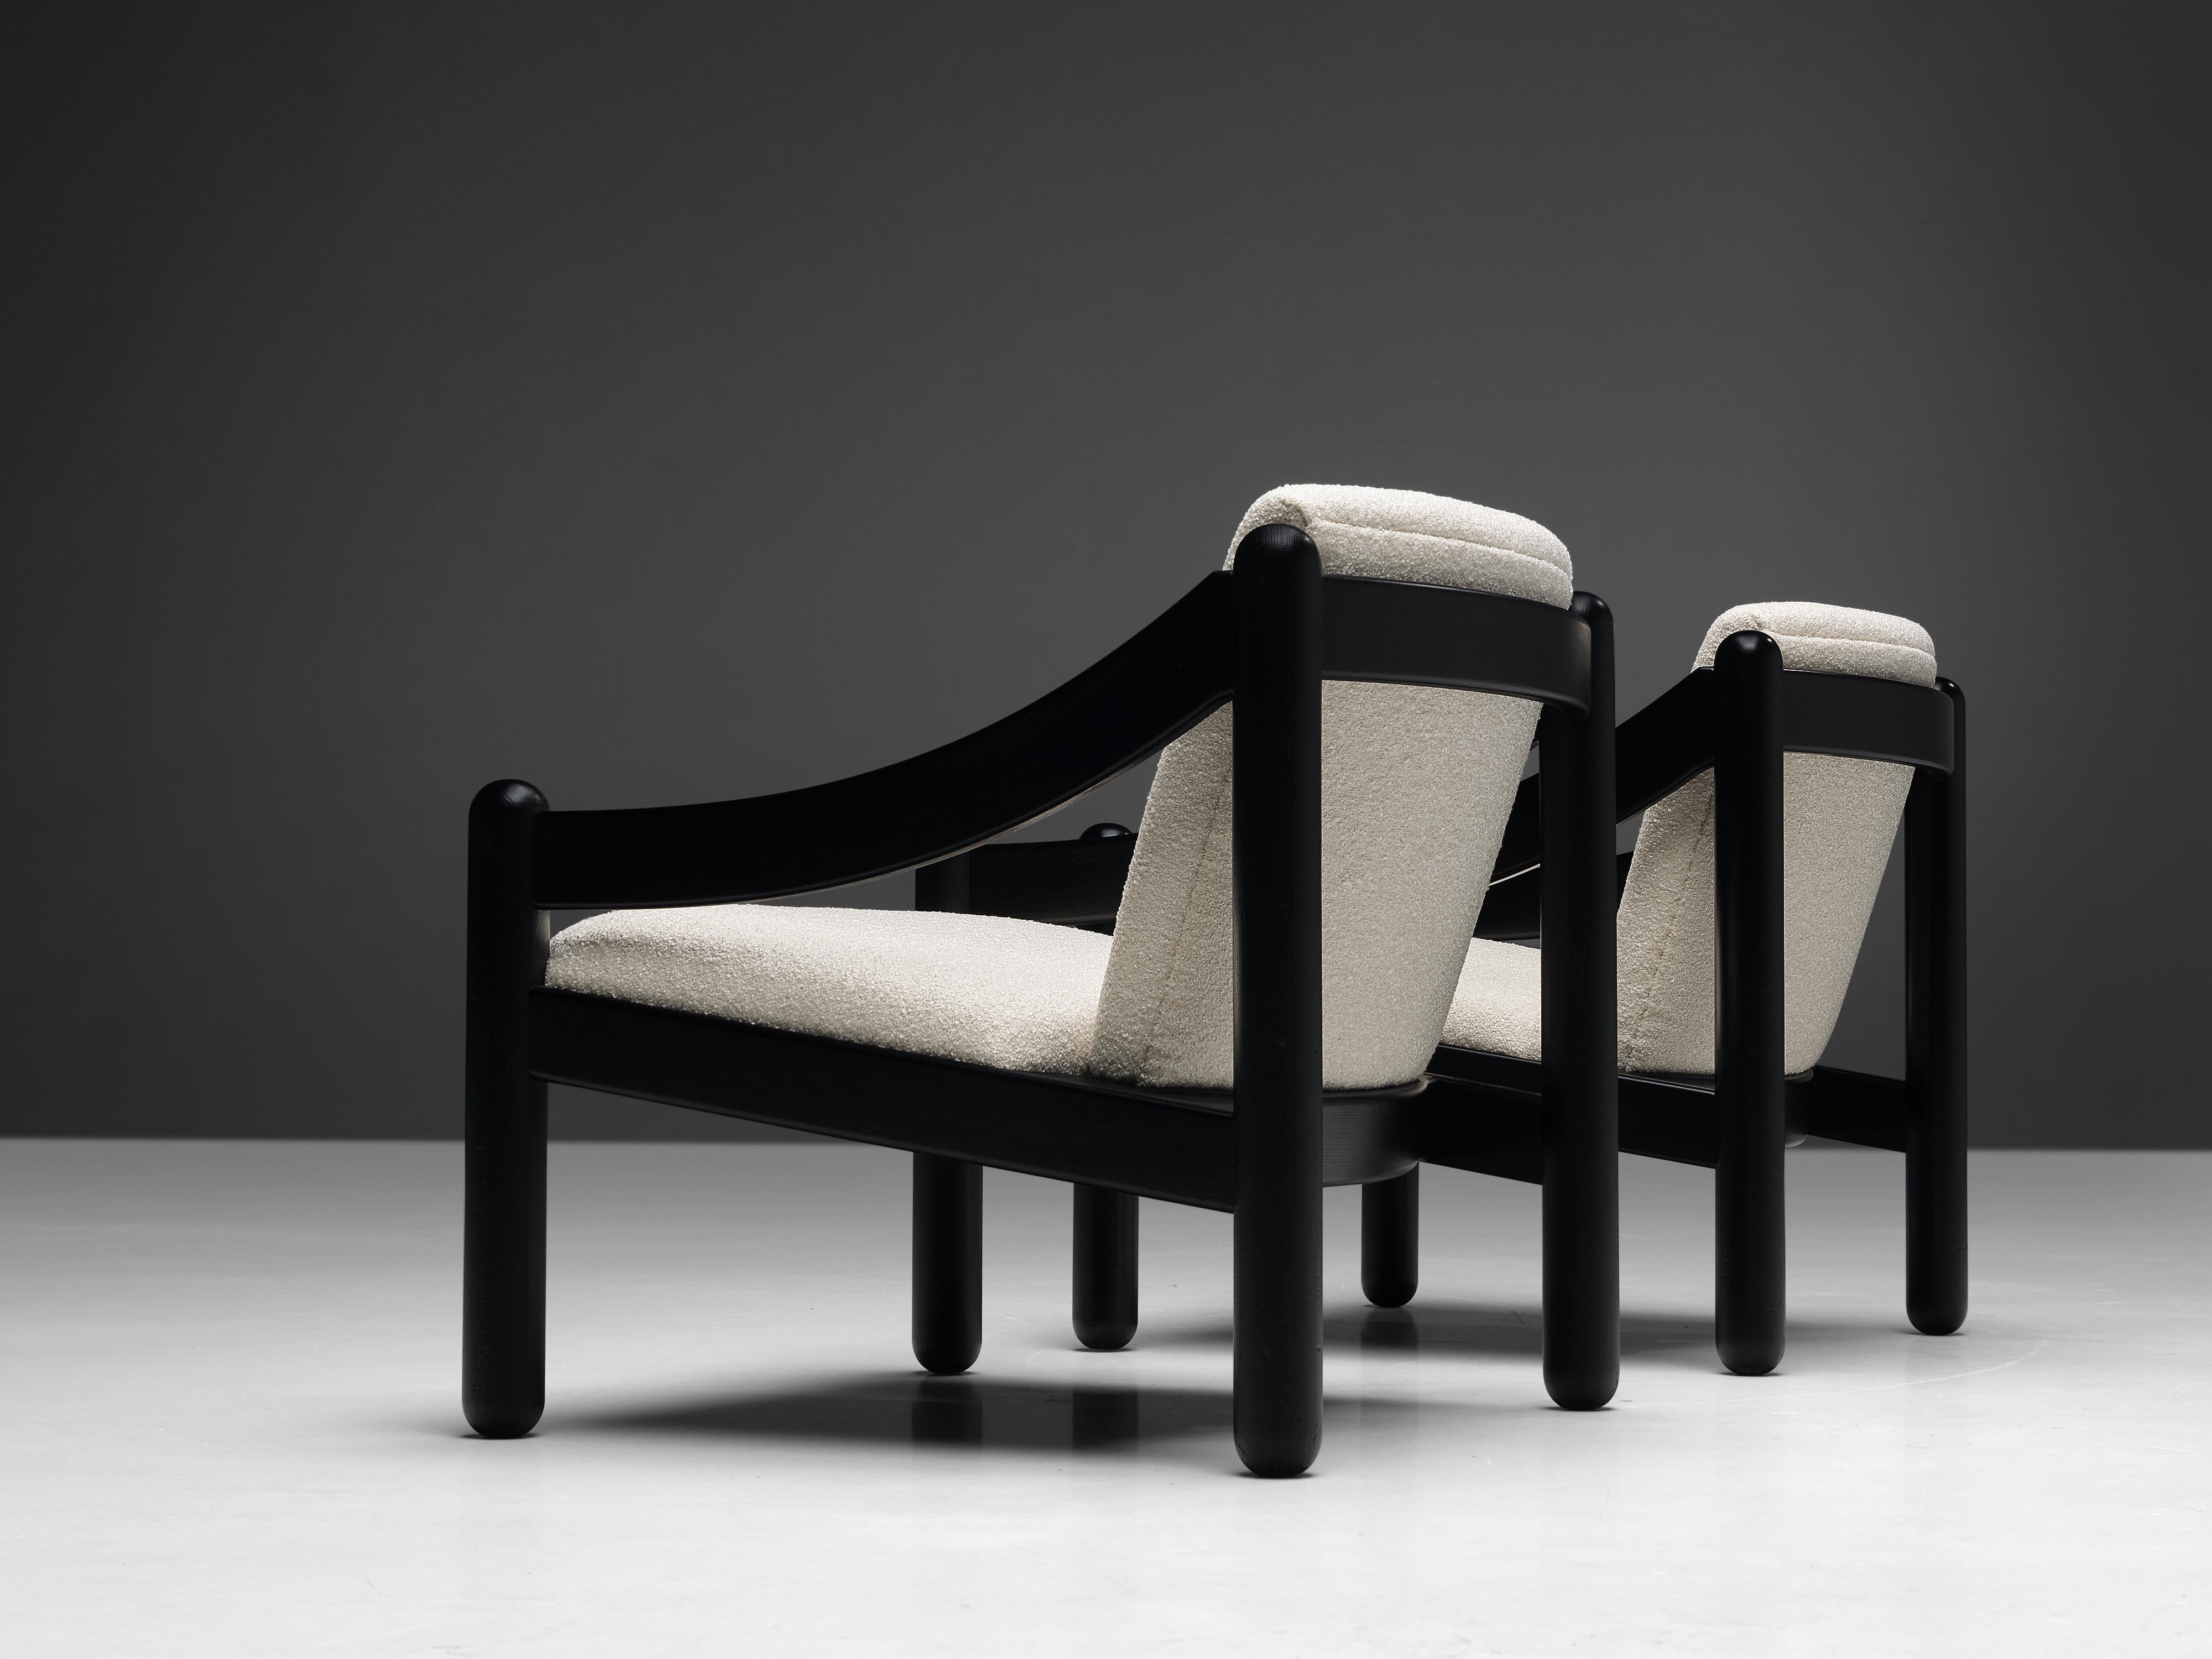 Vico Magistretti for Cassina Pair of ‘Carimate’ Lounge Chairs